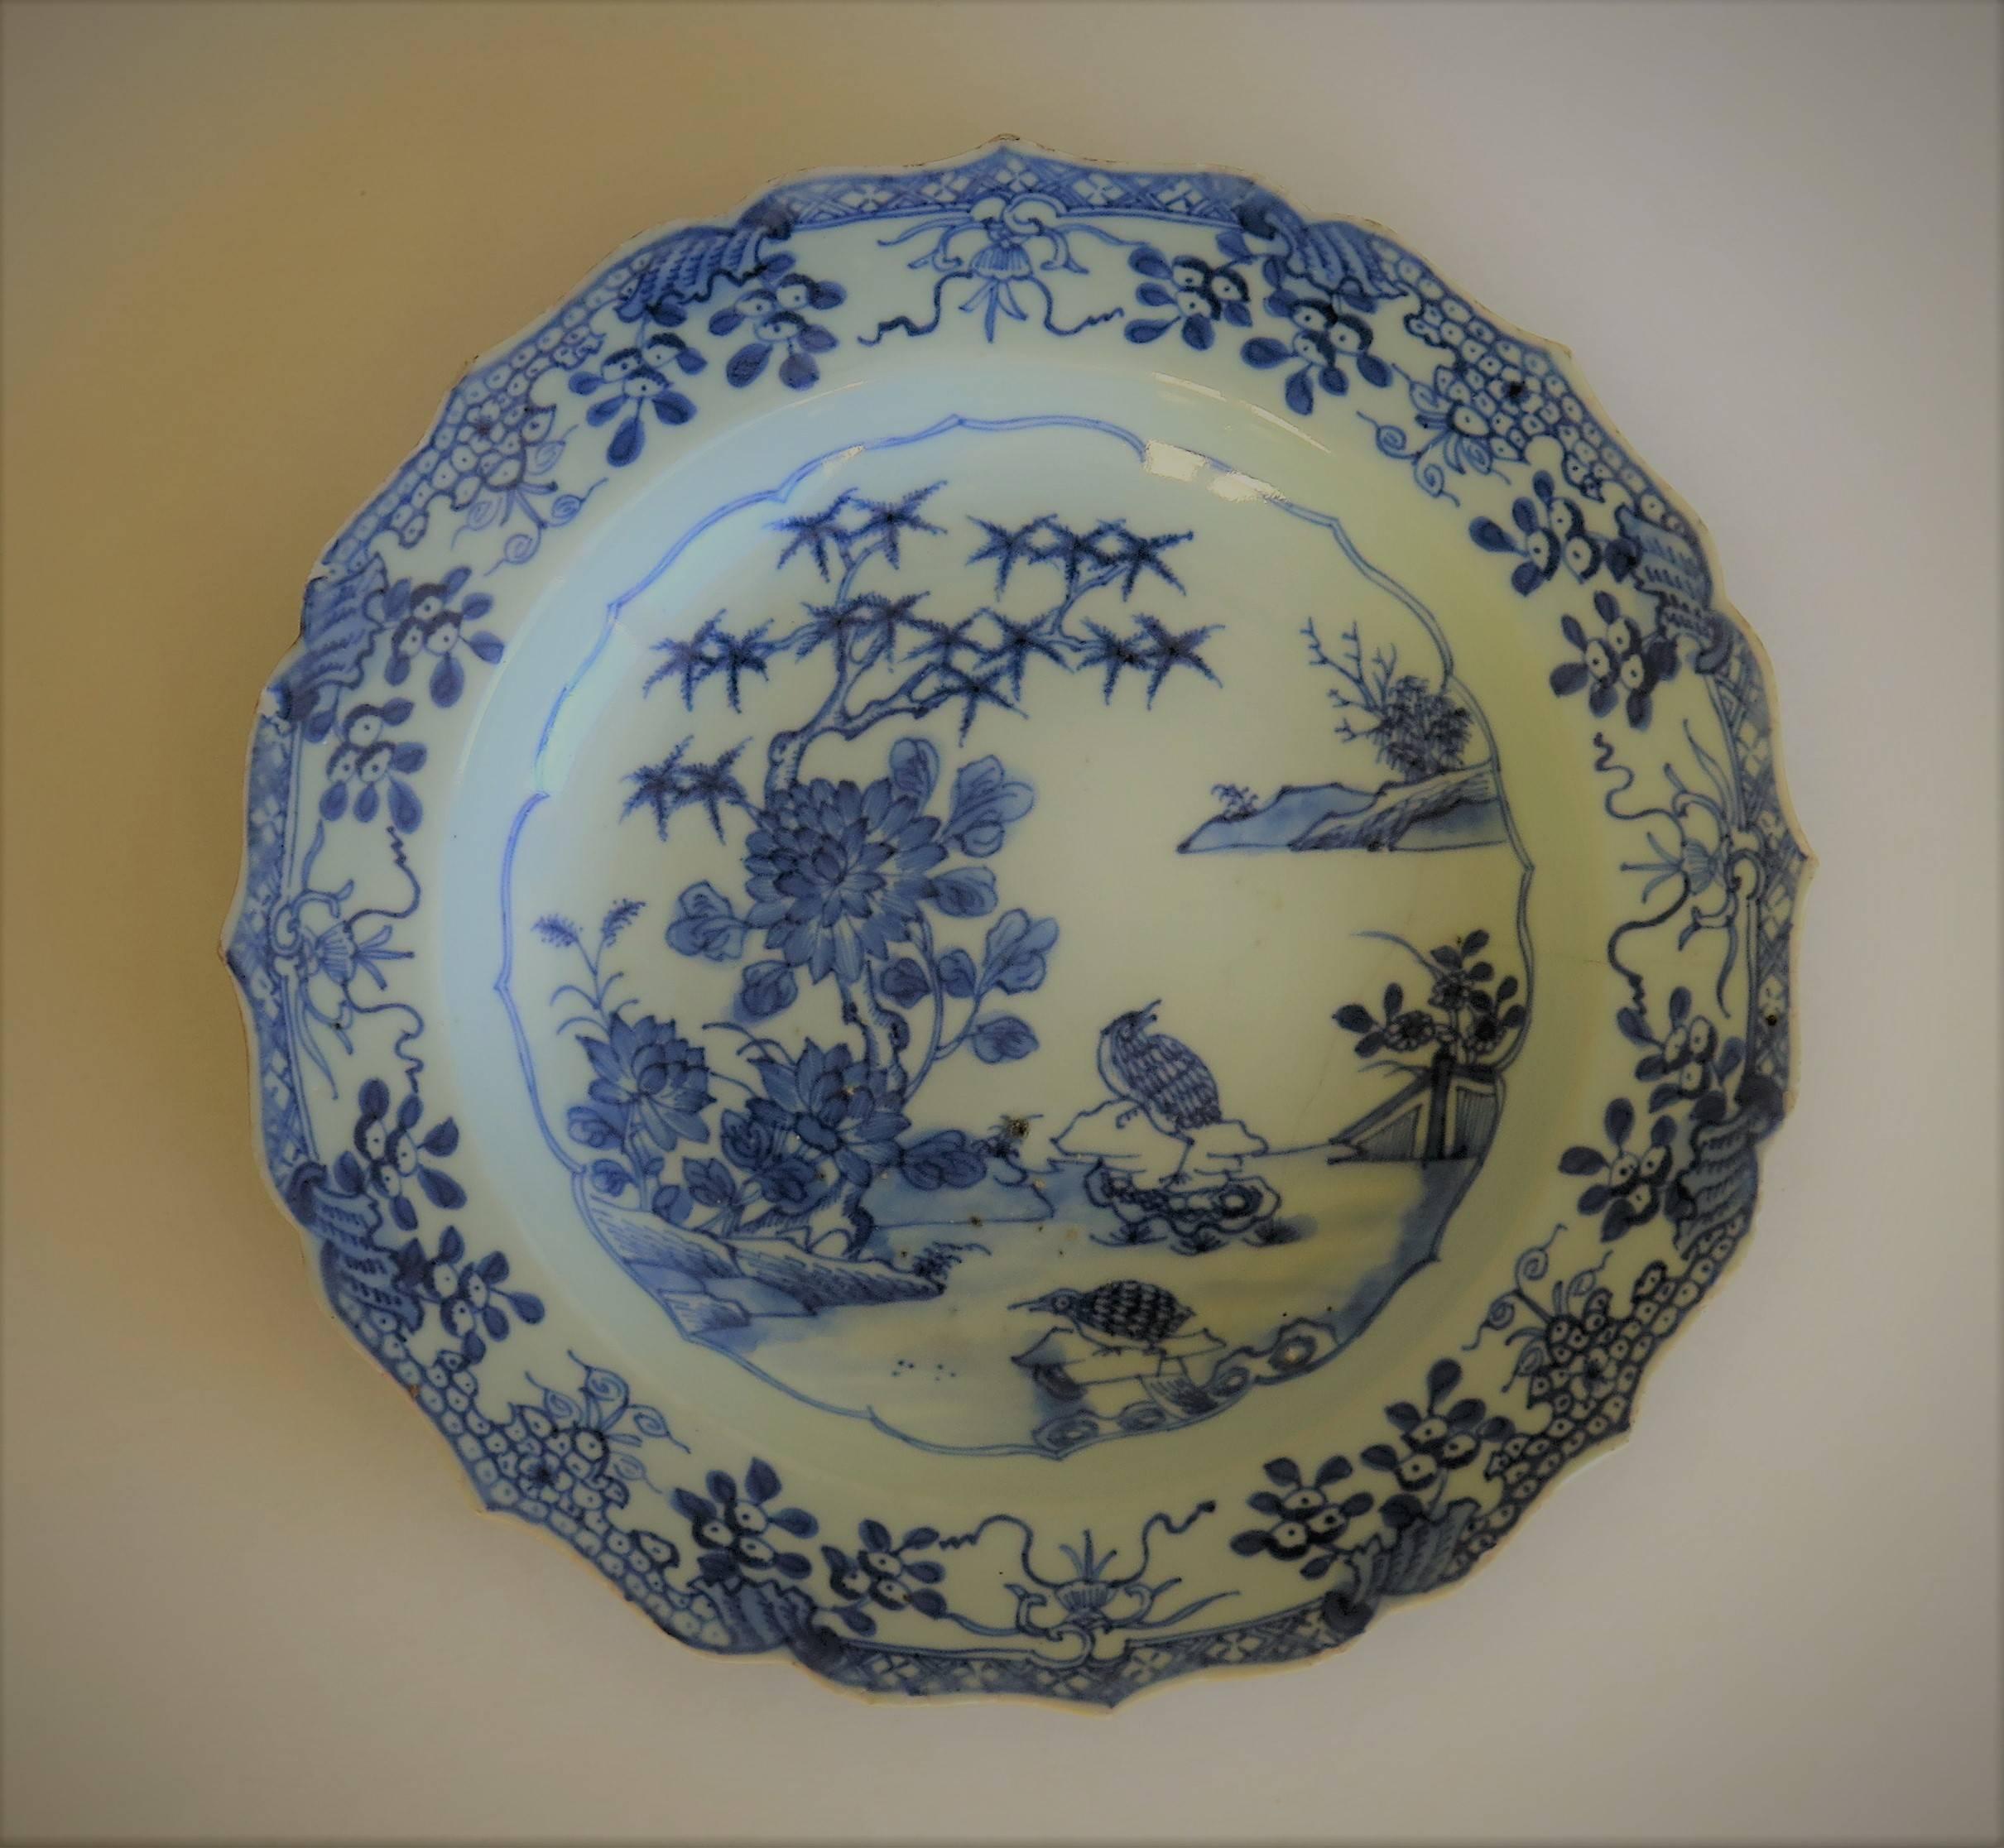 This is a good Chinese porcelain bowl or plate made for the export (Canton) market, during the second half of the 18th century.

The plate is circular with a nice scalloped edge and well decorated in varying shades of cobalt blue, with a glaze of